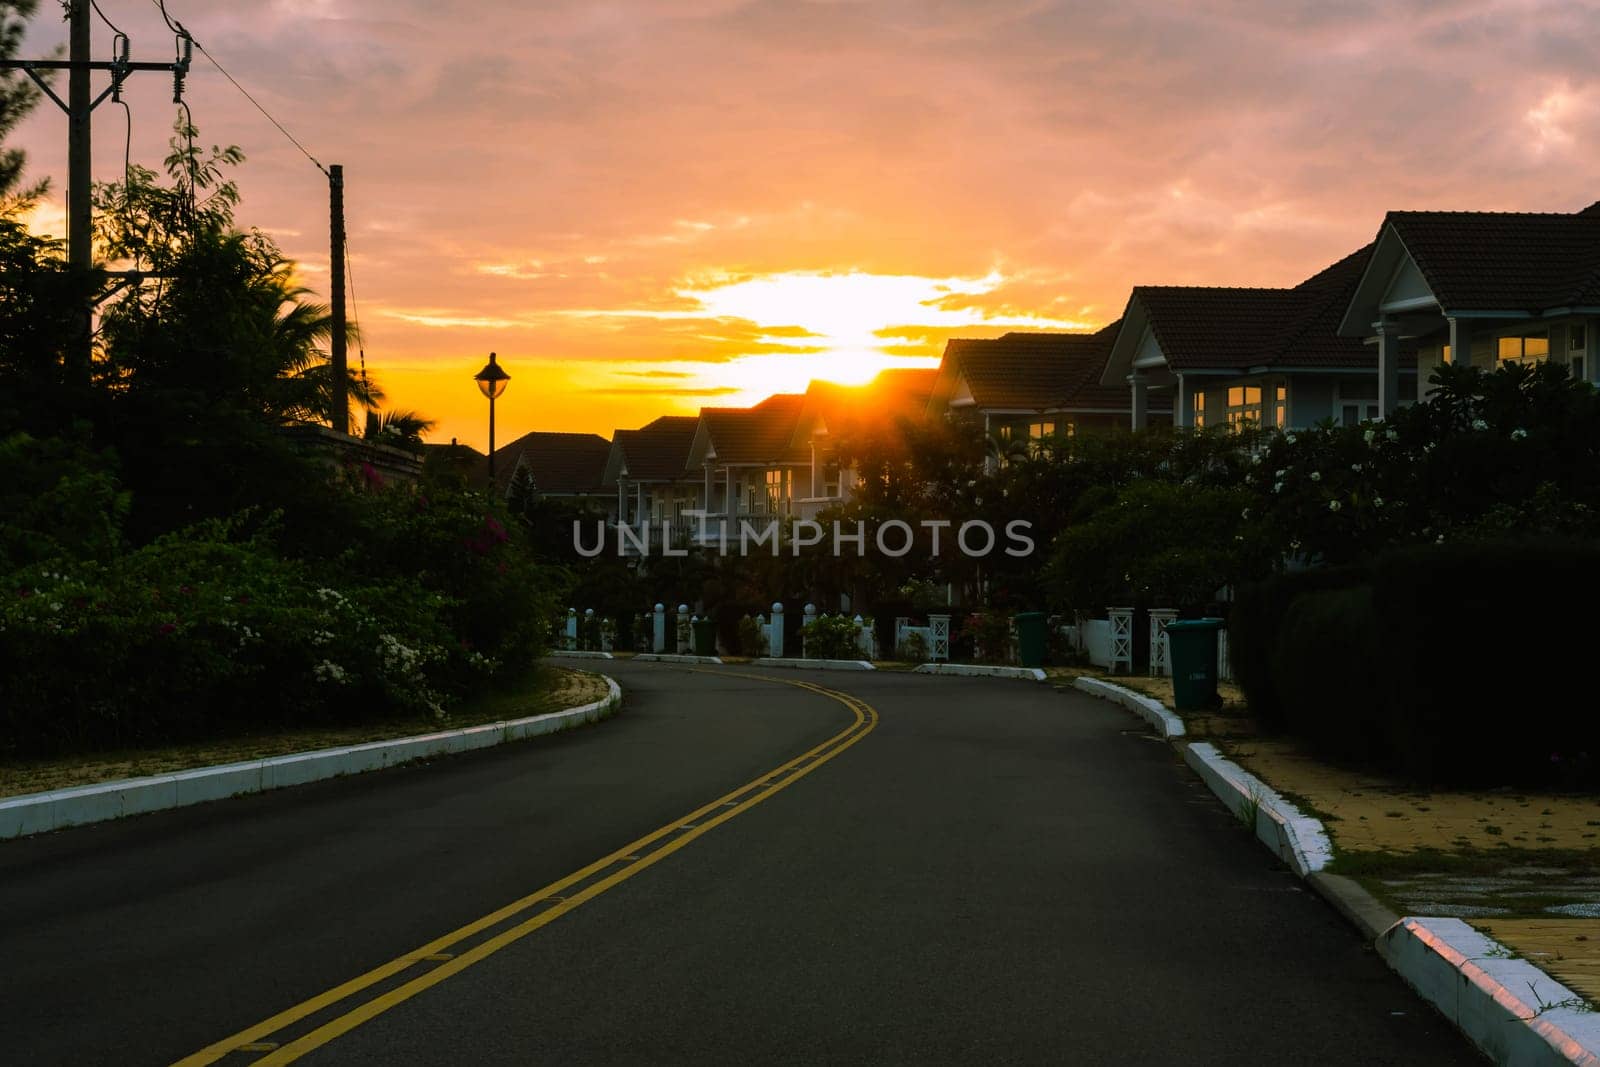 Modern cottages row road sidewalk two story buildings residential villas village New Estate Reflection dawn Sun in windows.